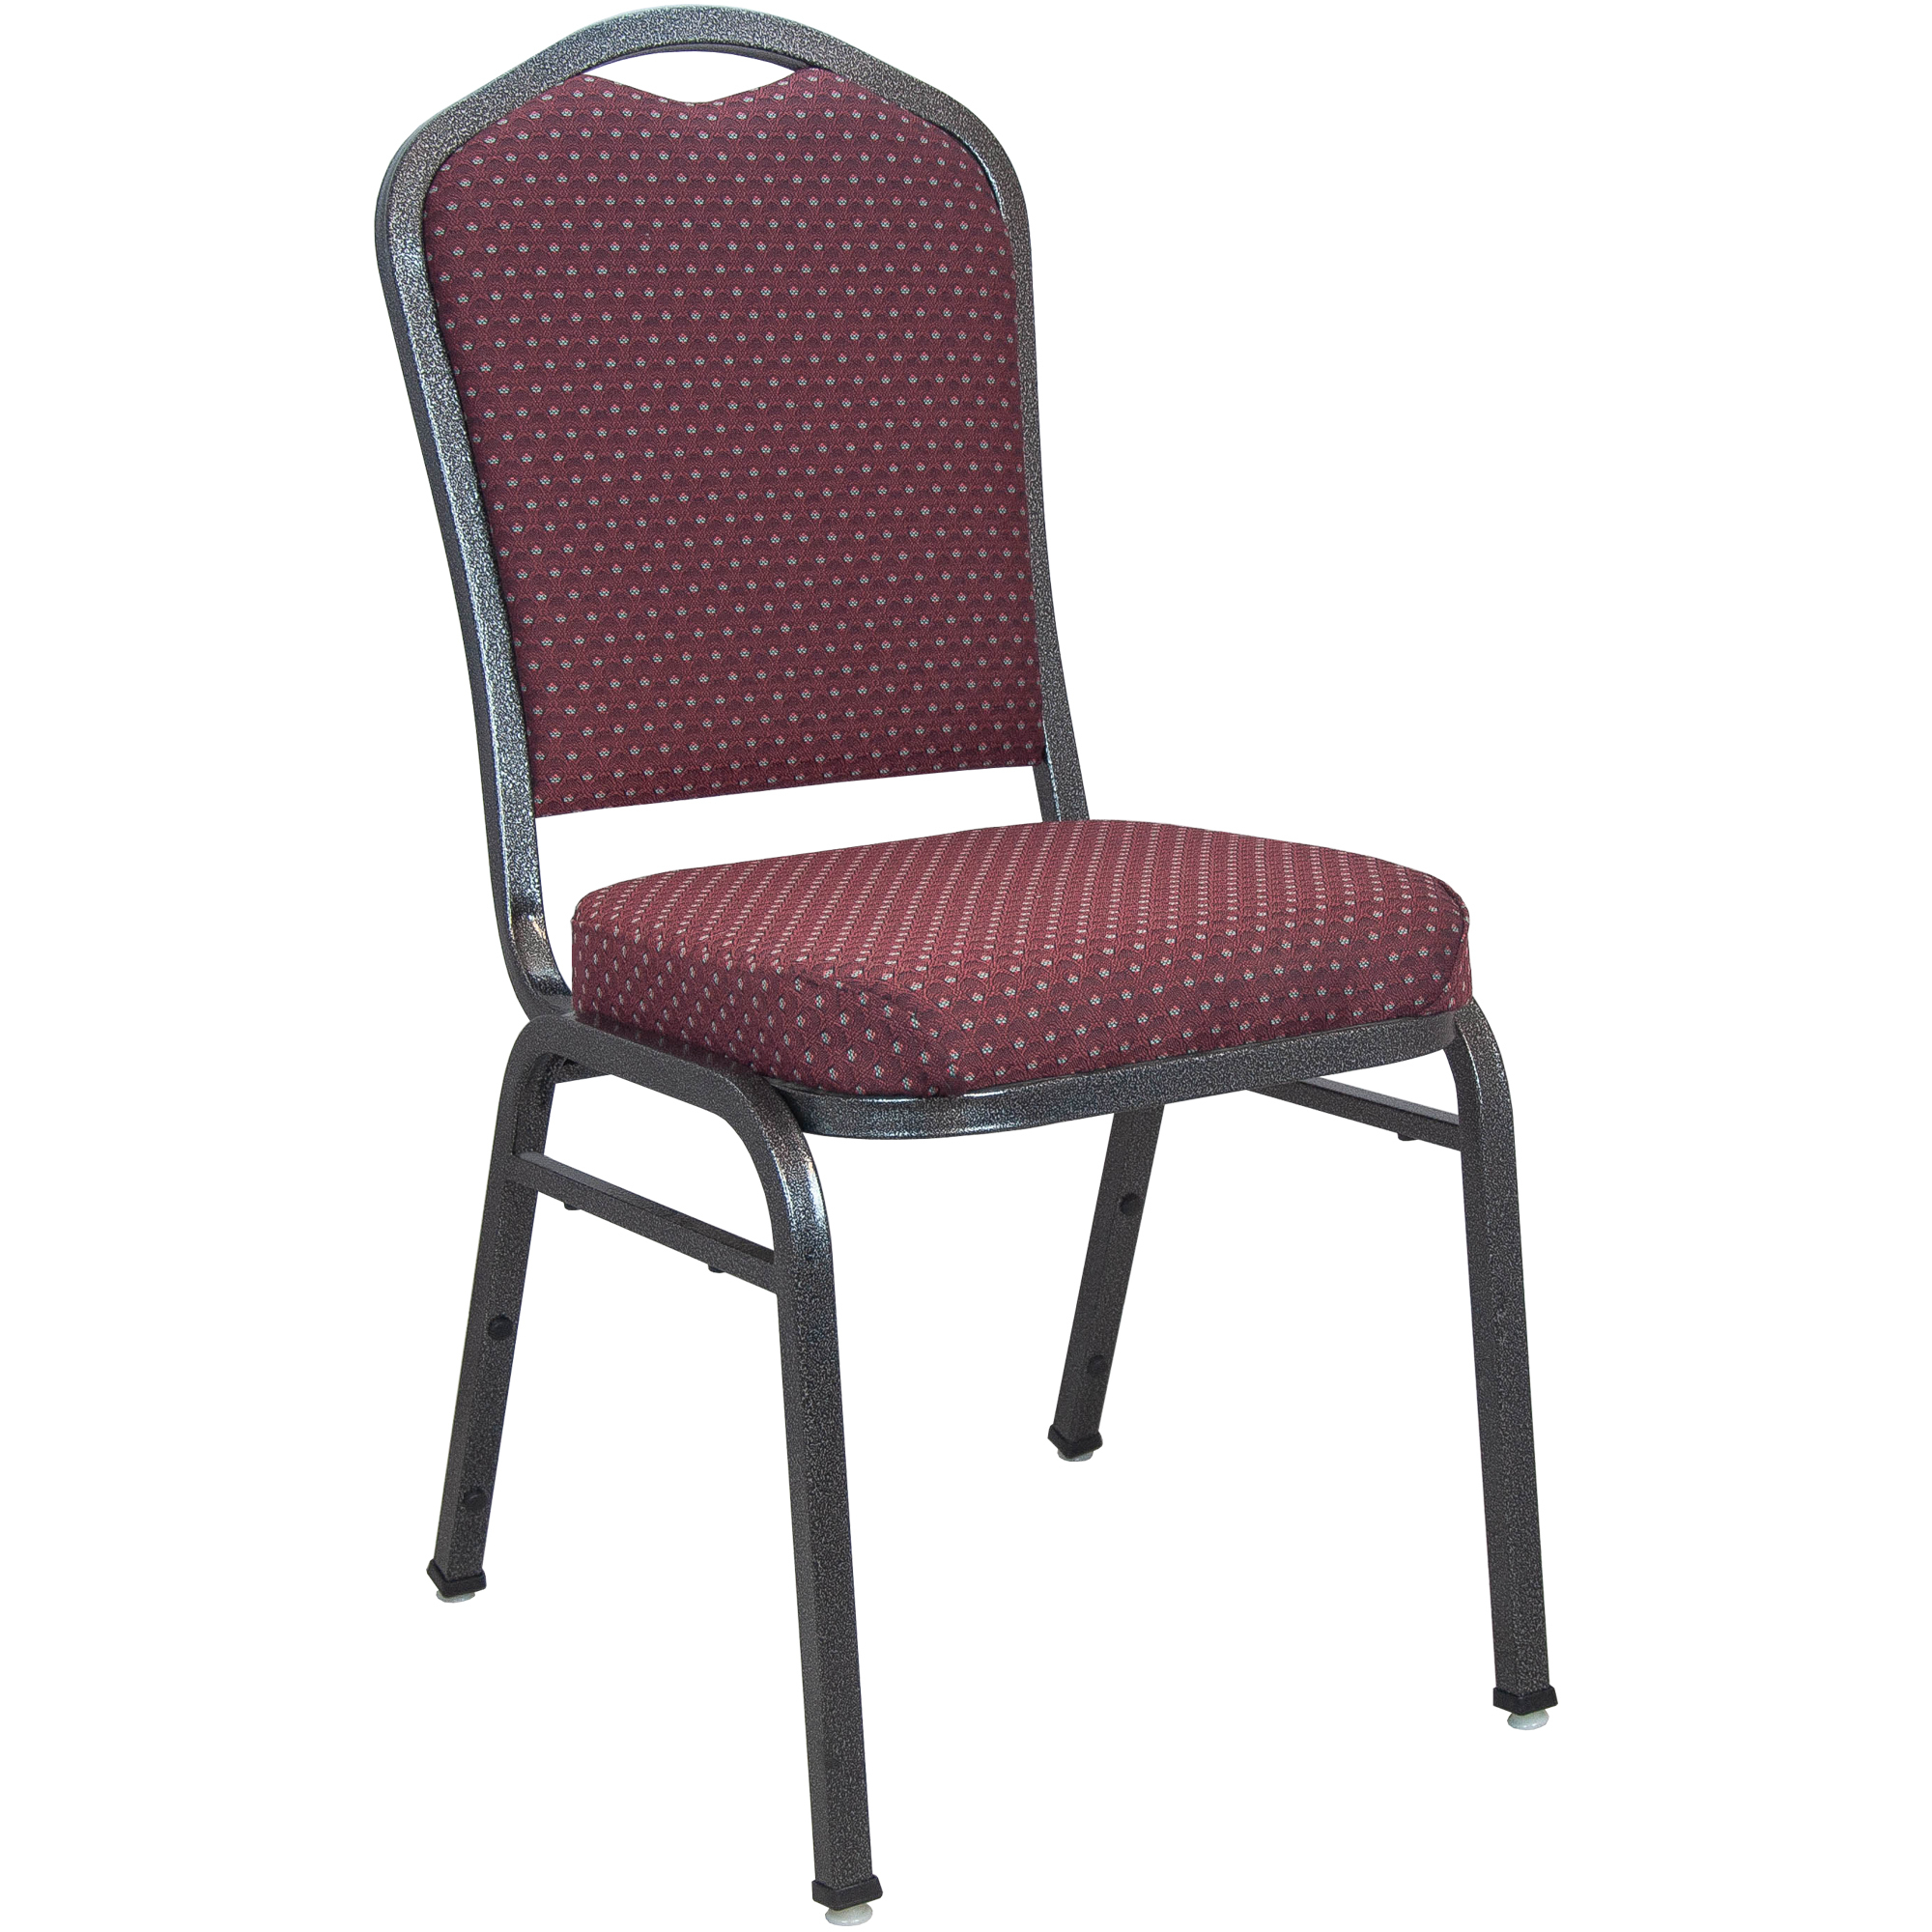 Flash Furniture, Burgundy-pattern Crown Back Banquet Chair, Primary Color Burgundy, Included (qty.) 1, Model CBMW202